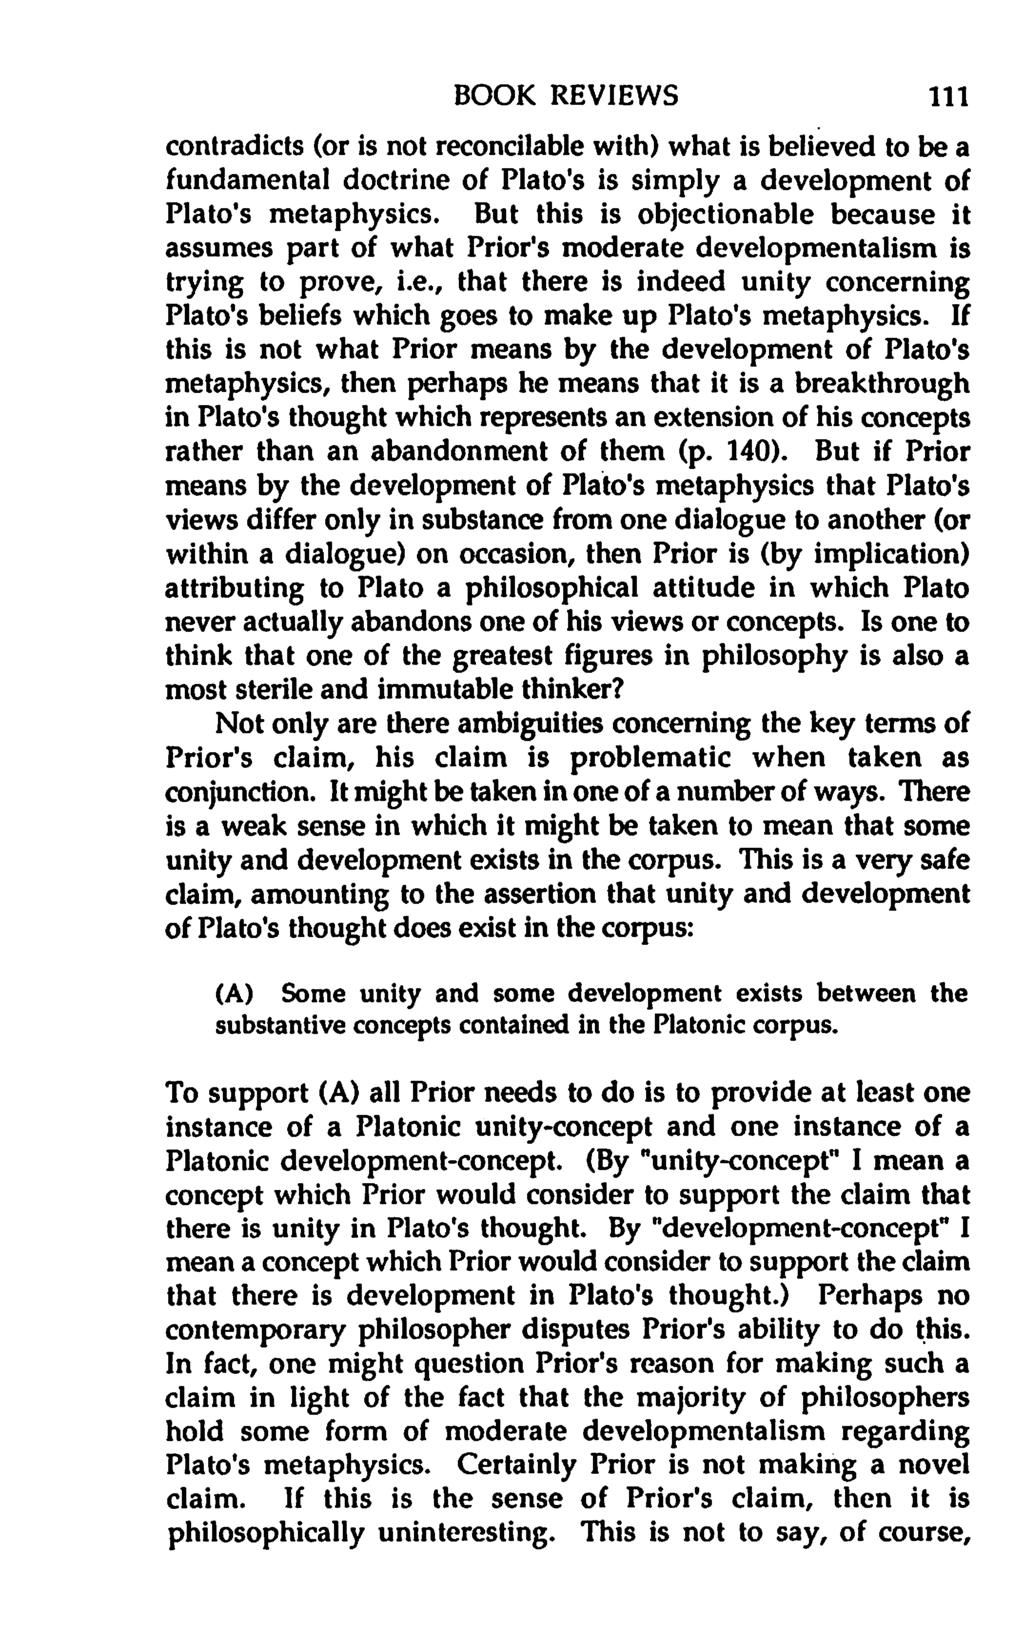 BOOK REVIEWS 111 contradicts (or is not reconcilable with) what is believed to be a fundamental doctrine of Plato's is simply a development of Plato's metaphysics.